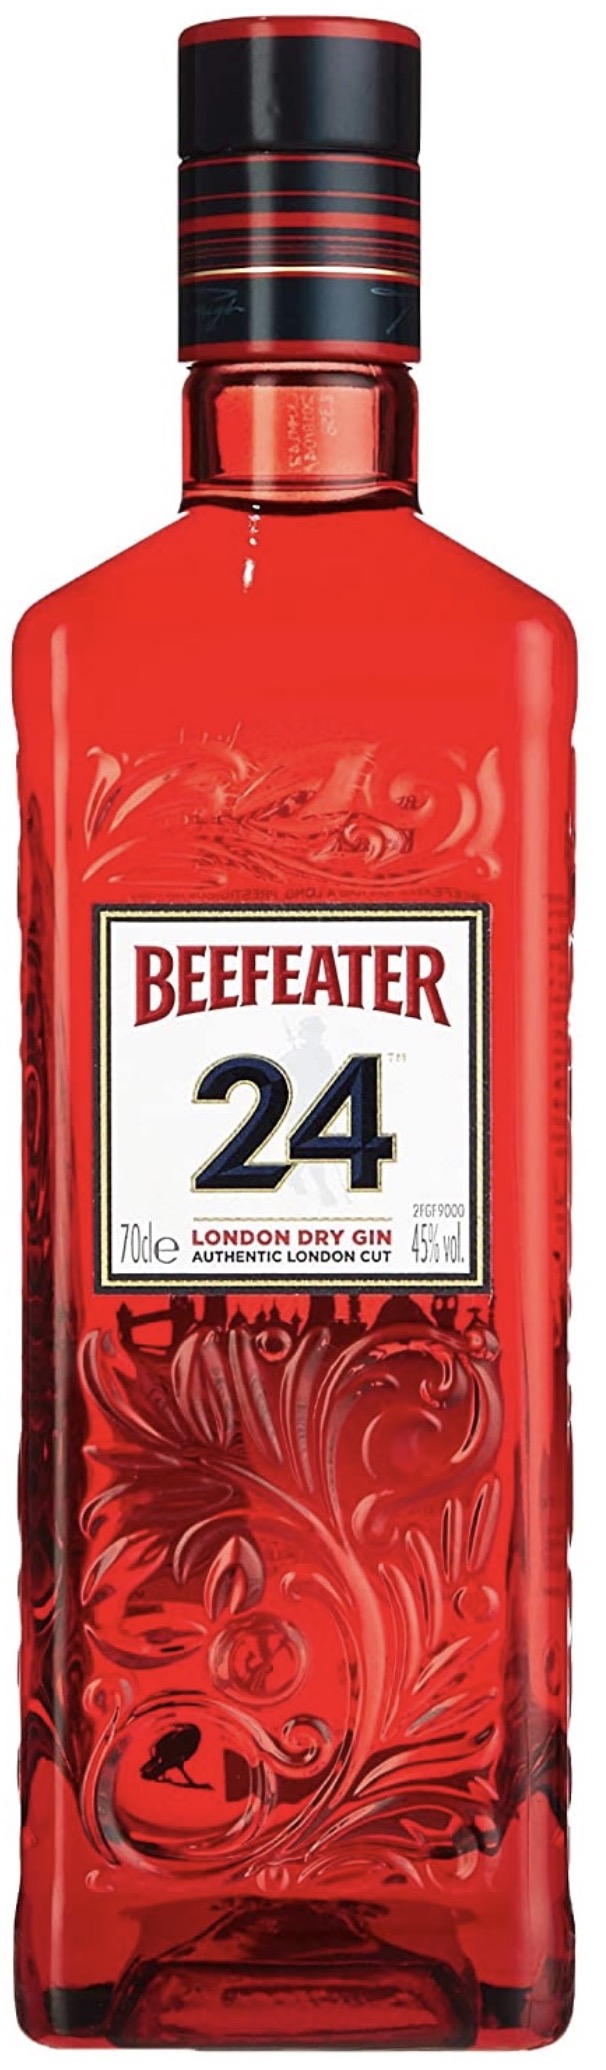 Beefeater 24 London Dry Gin 45% vol. 0,7L